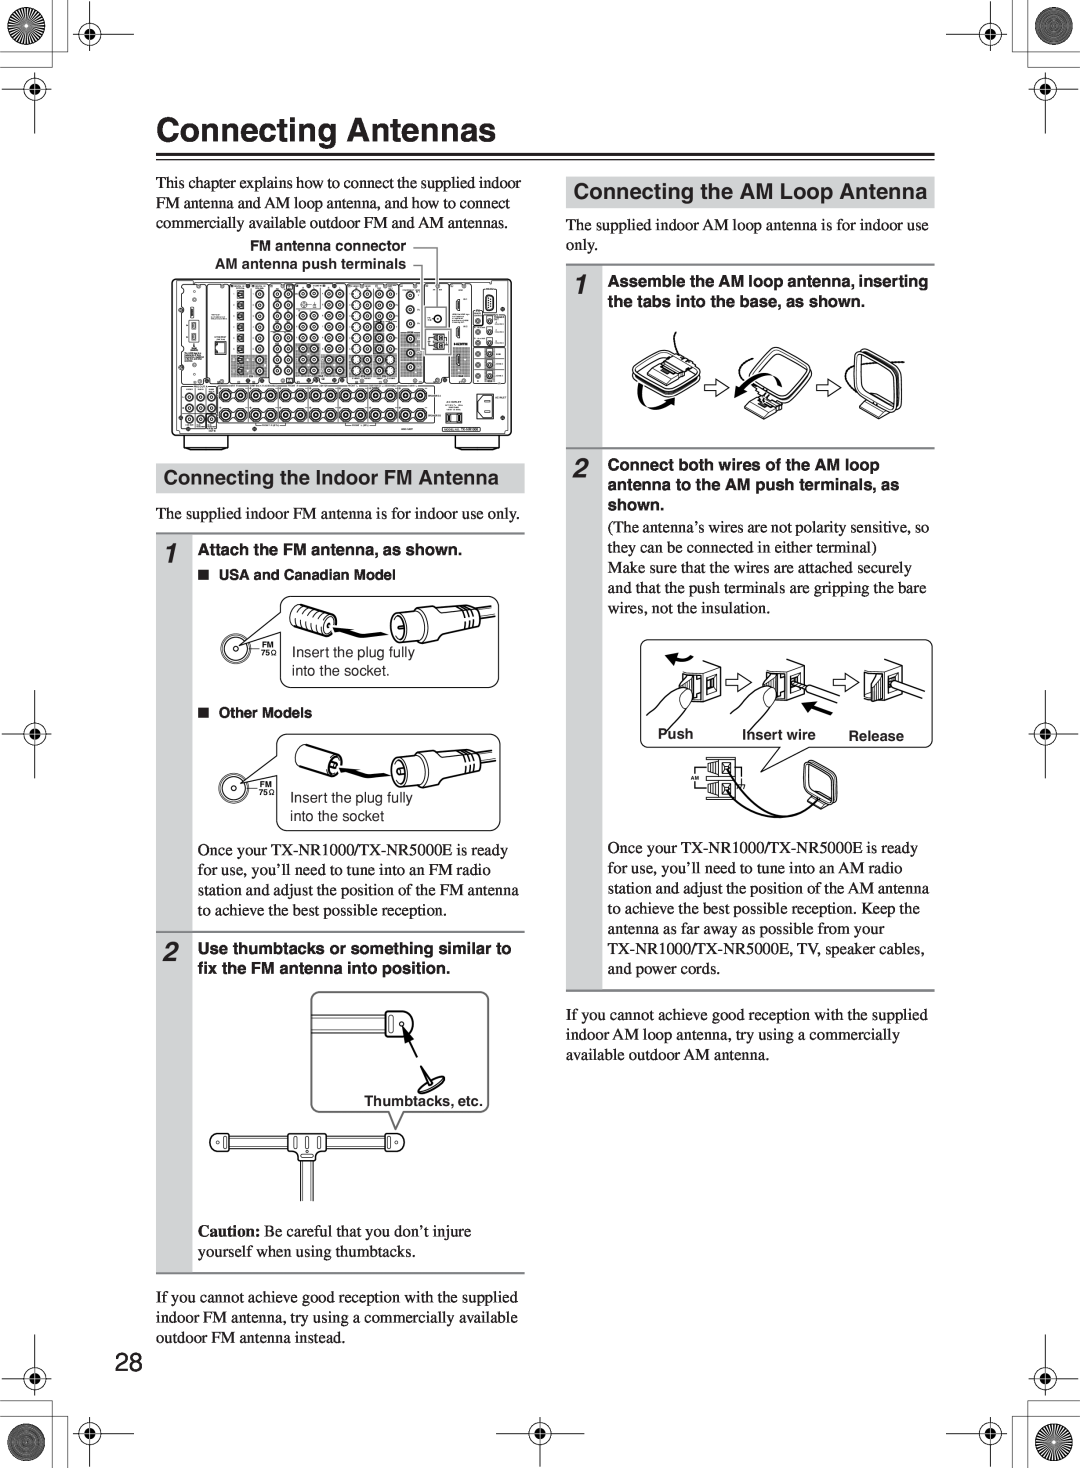 Onkyo TX-NR1000 instruction manual Connecting Antennas, Connecting the AM Loop Antenna, Connecting the Indoor FM Antenna 